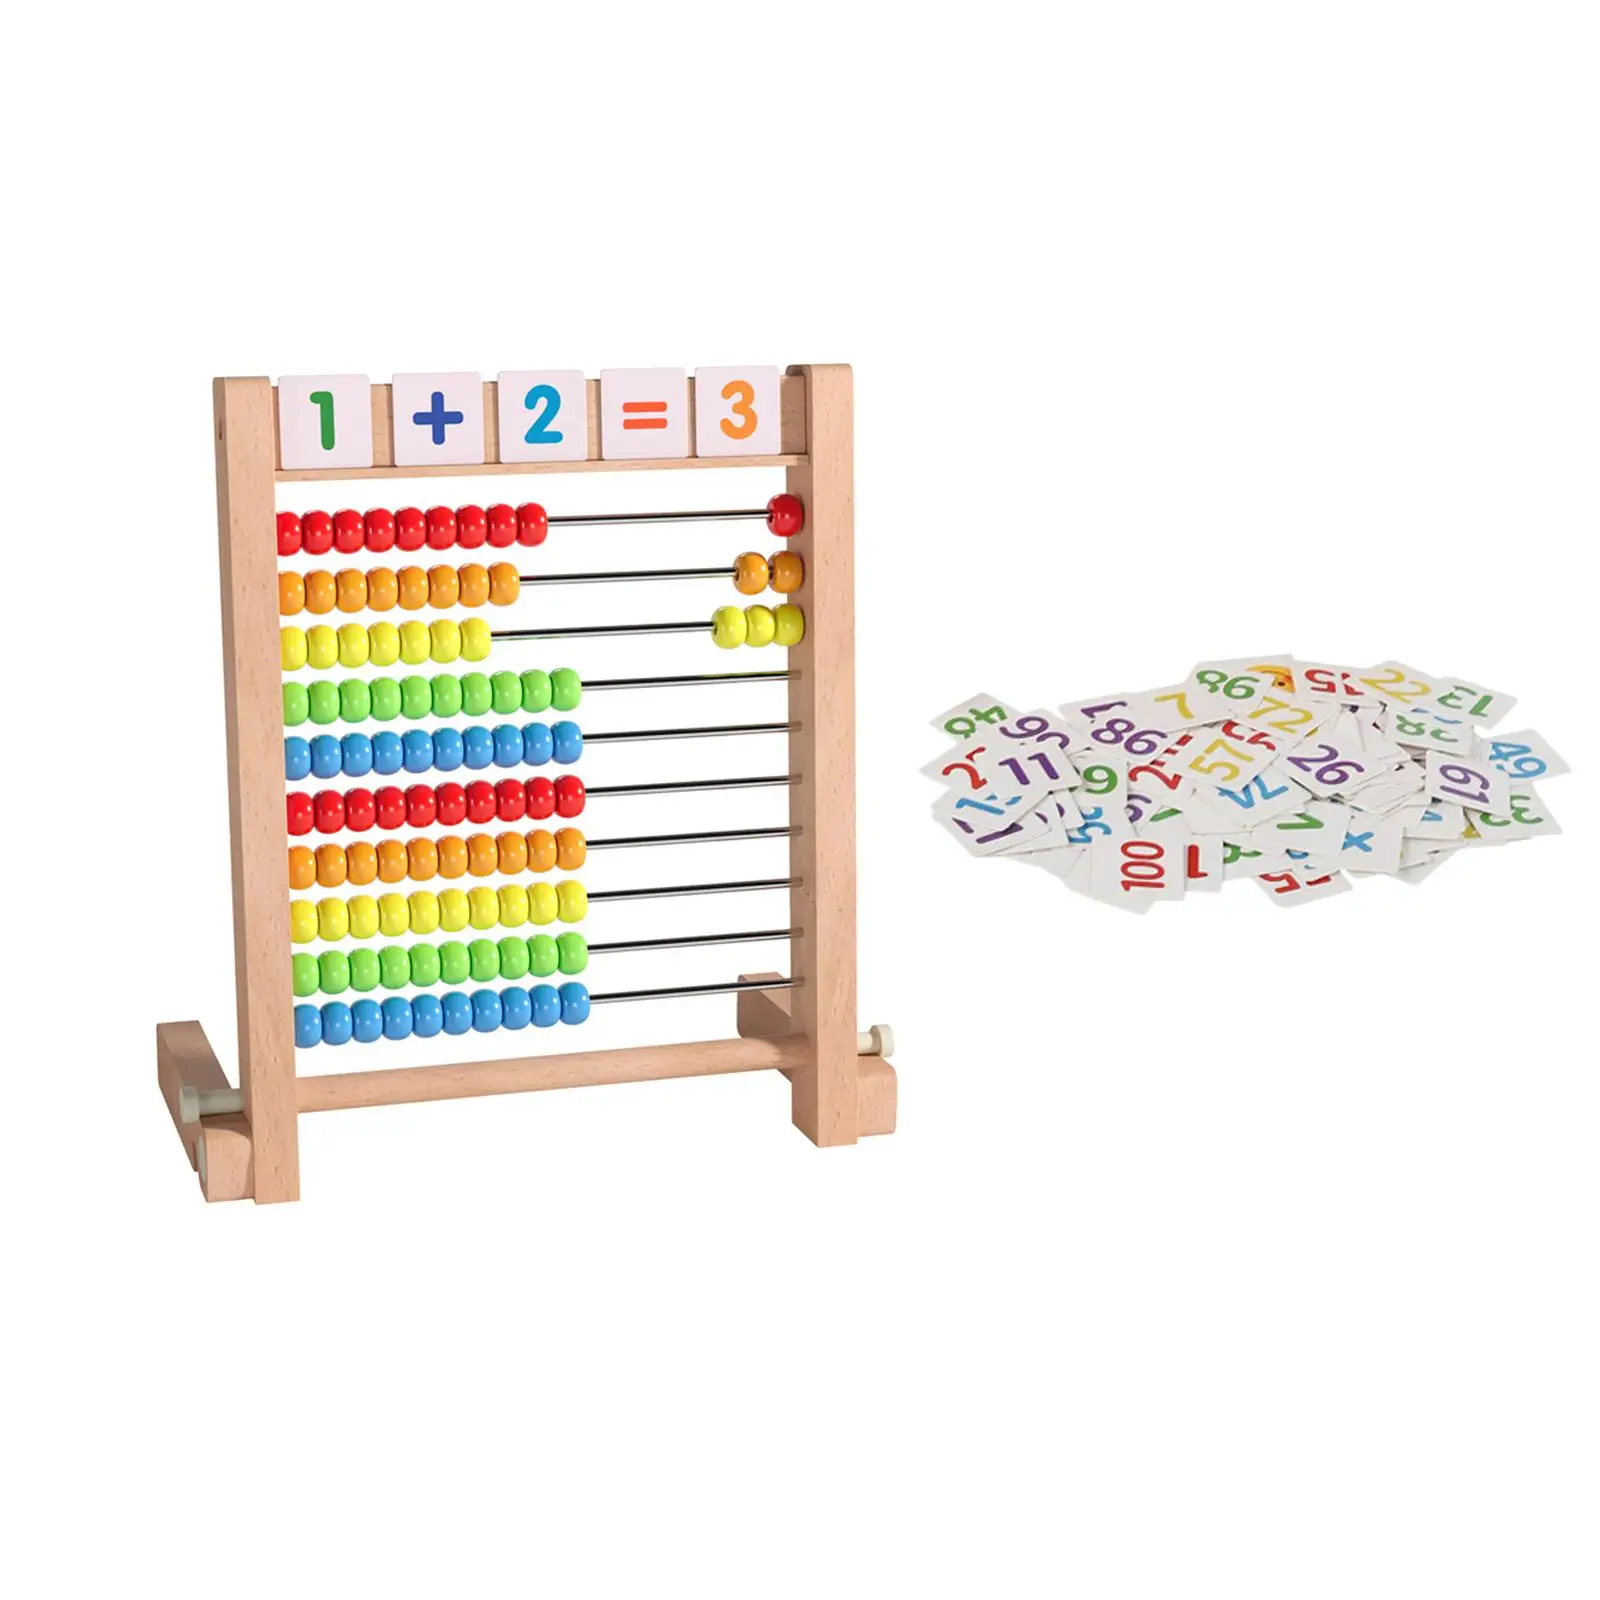 Classic Wooden Abacus Ten Frame Set Educational Counting Toy Montessori for Preschool Toddlers Elementary Kindergarten Children